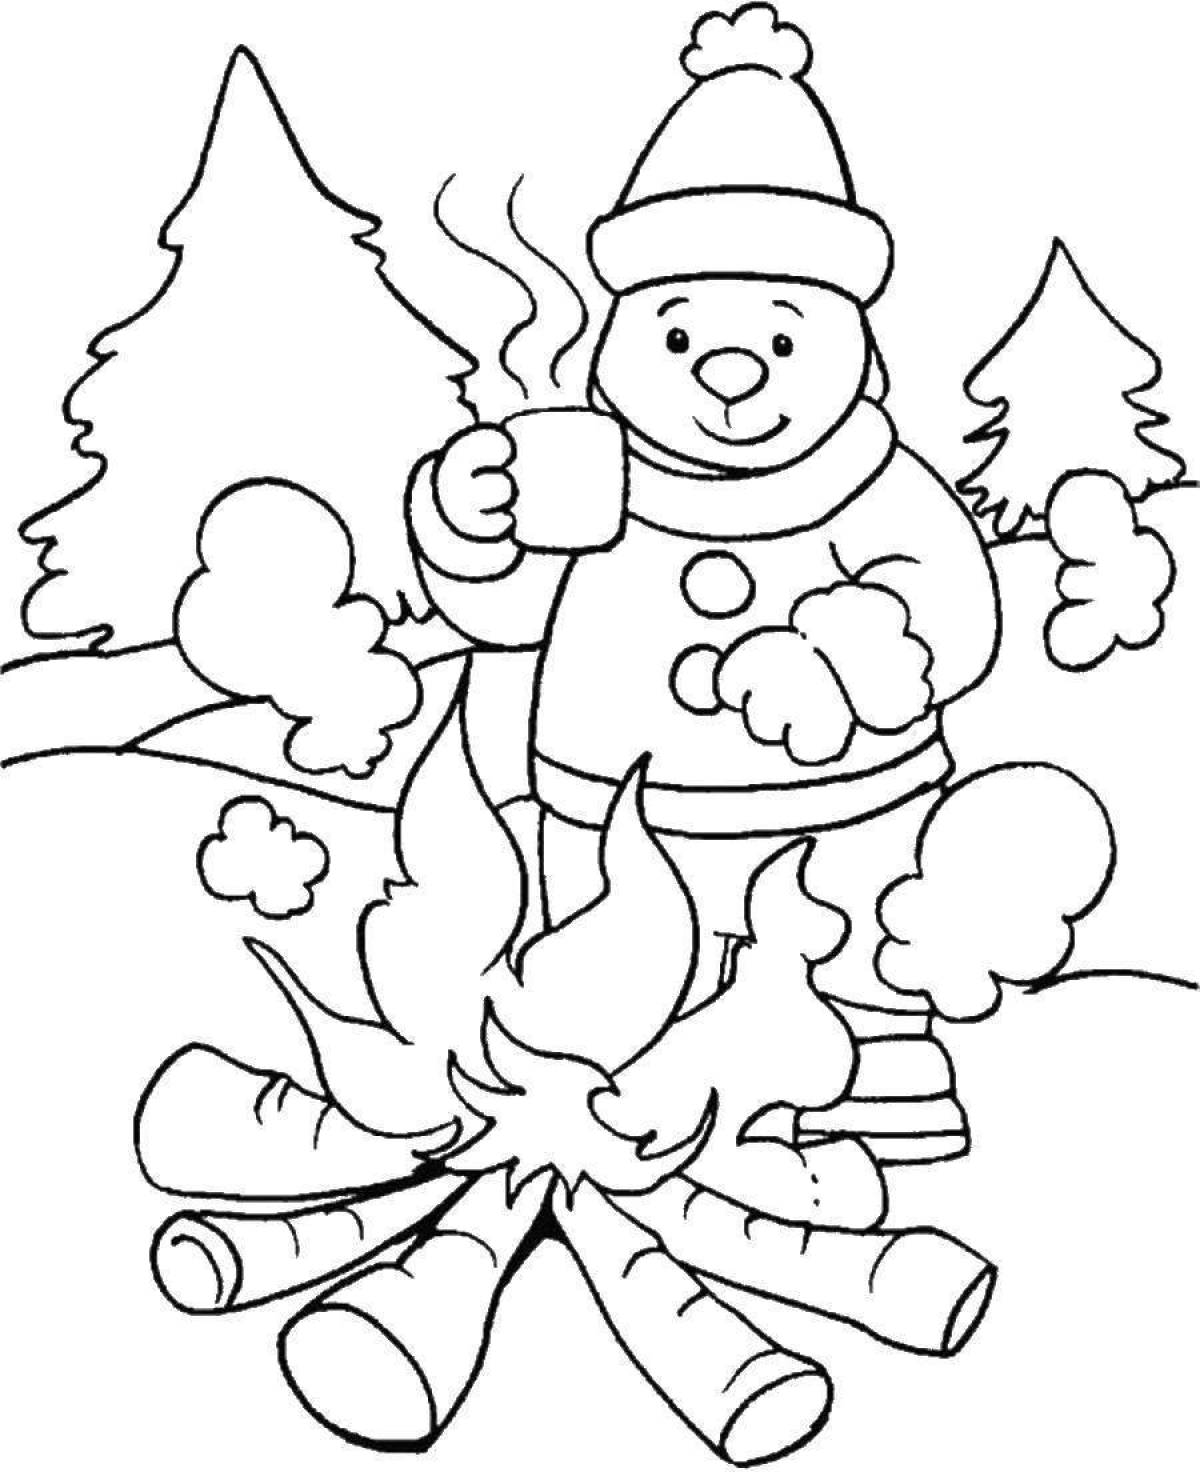 Great winter coloring book for kids 5 years old